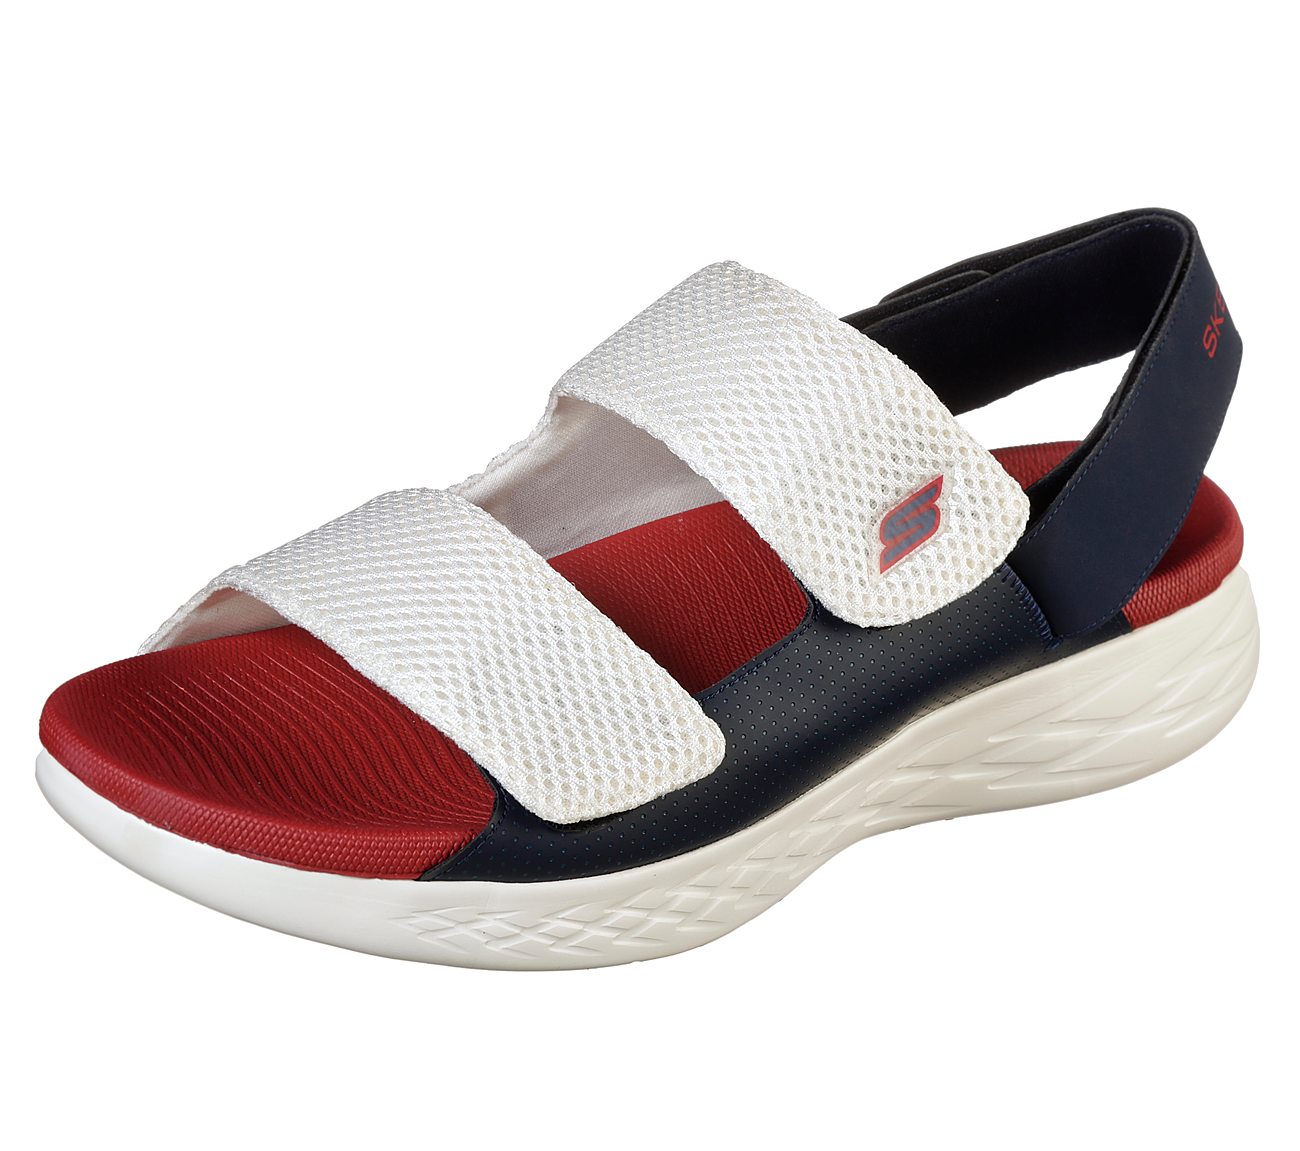 ON-THE-GO 600 - VIRTUOUS, WHITE/NAVY/RED Footwear Lateral View